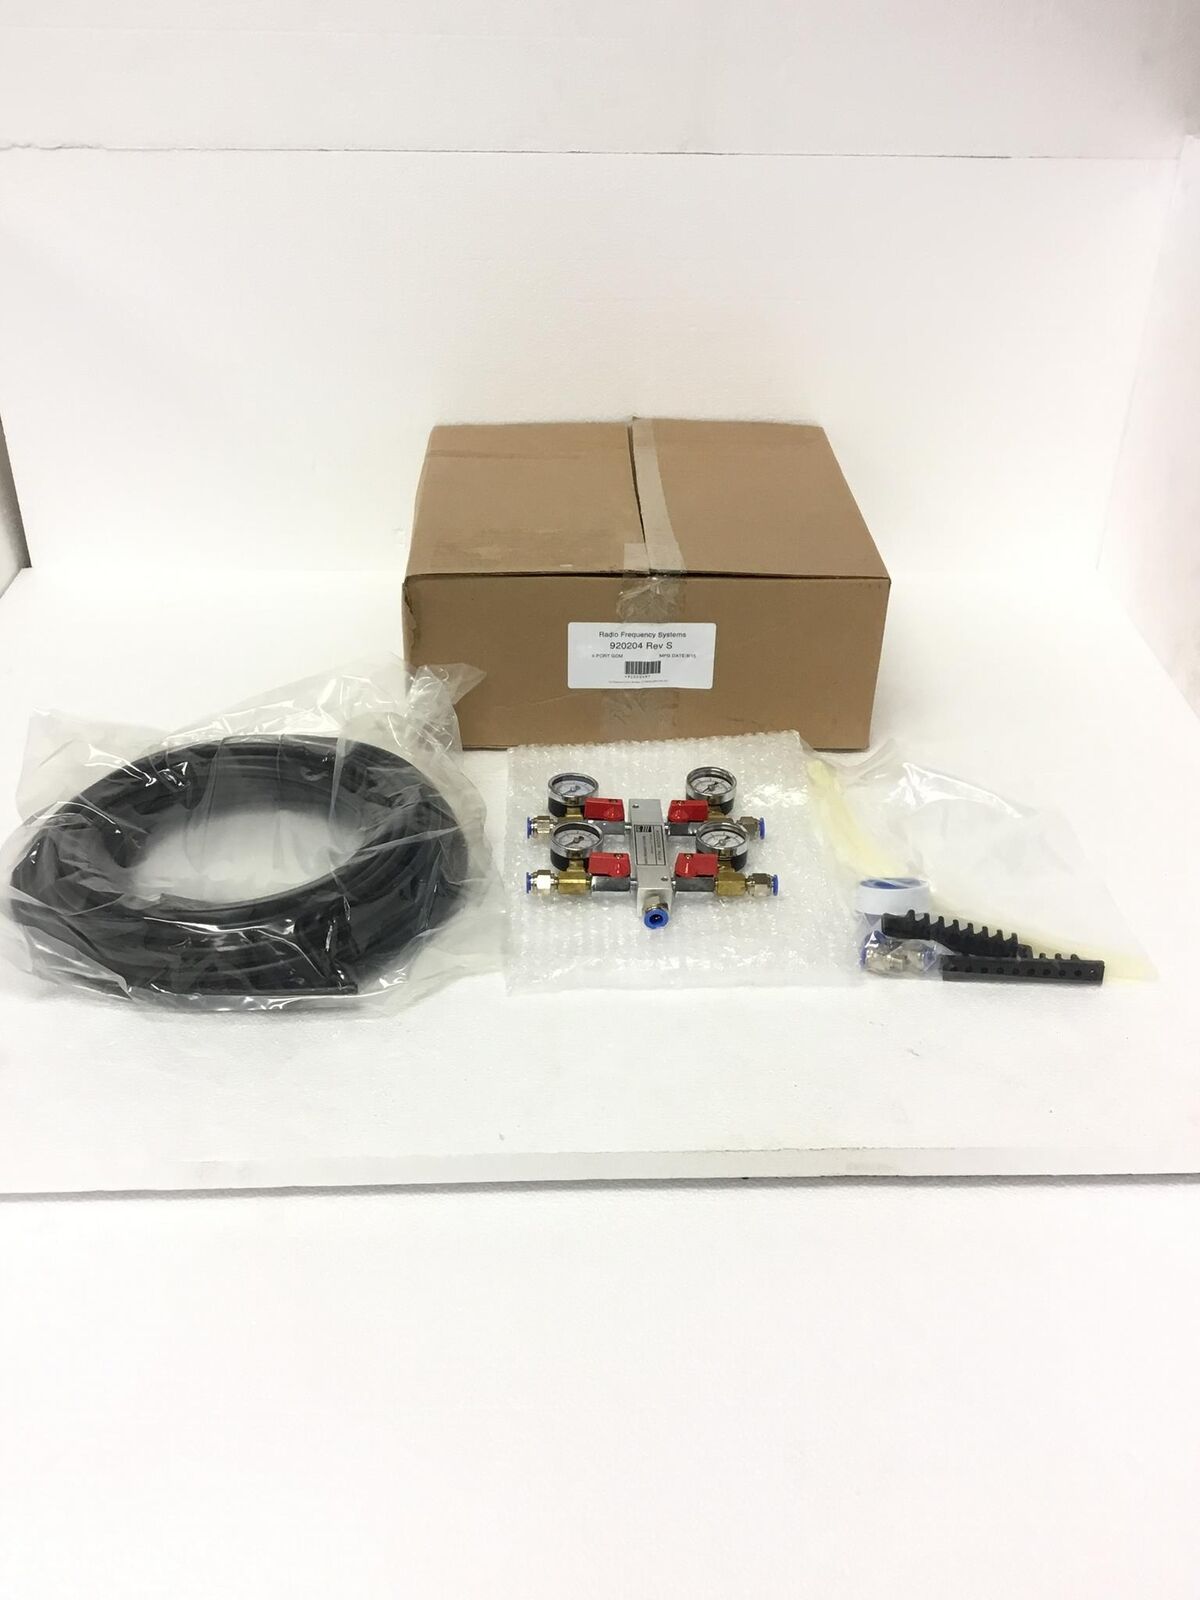 NEW RADIO FREQUENCY Systems 920204 Rev S 4 Port GDM w/Accessories,QTY